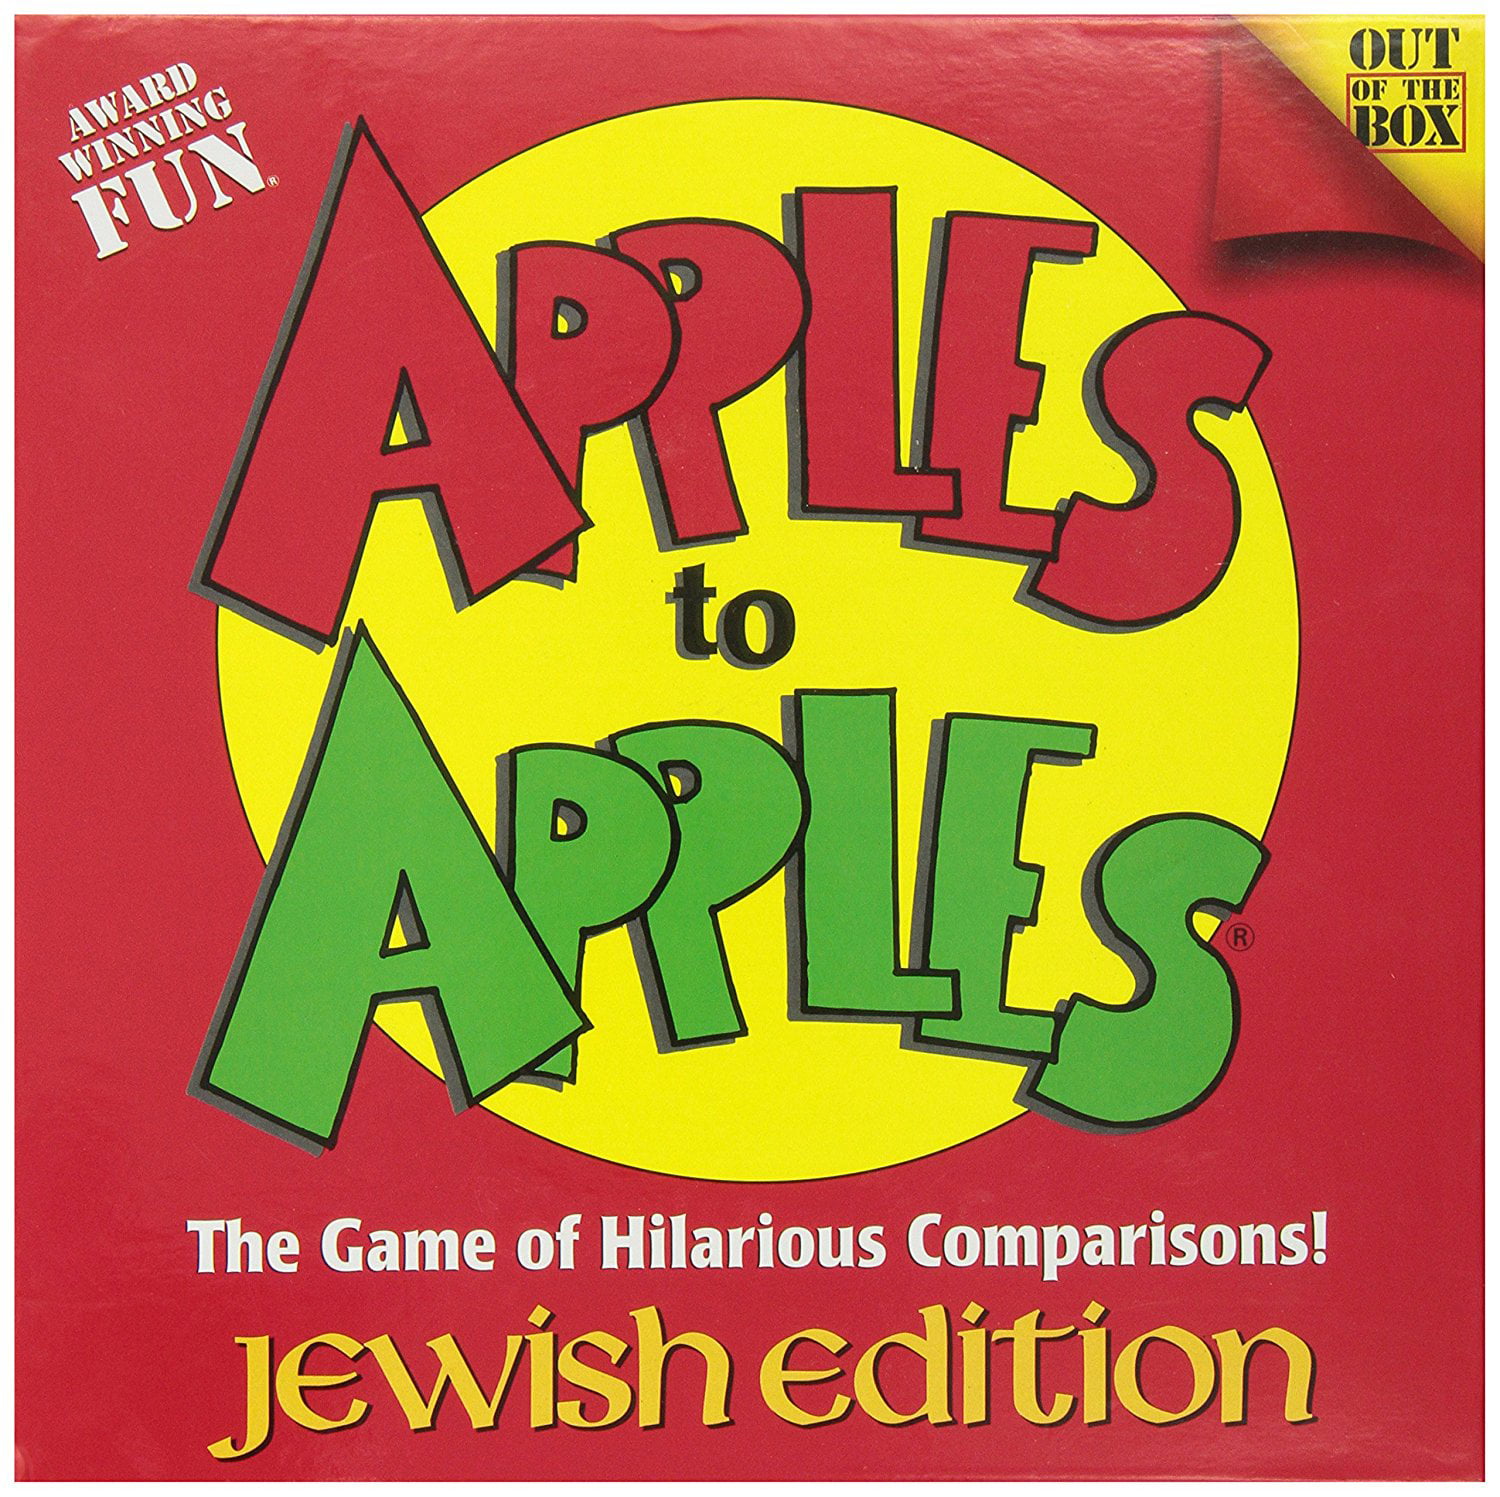 Details about   Apples to Apples Express Card Game by Mattel